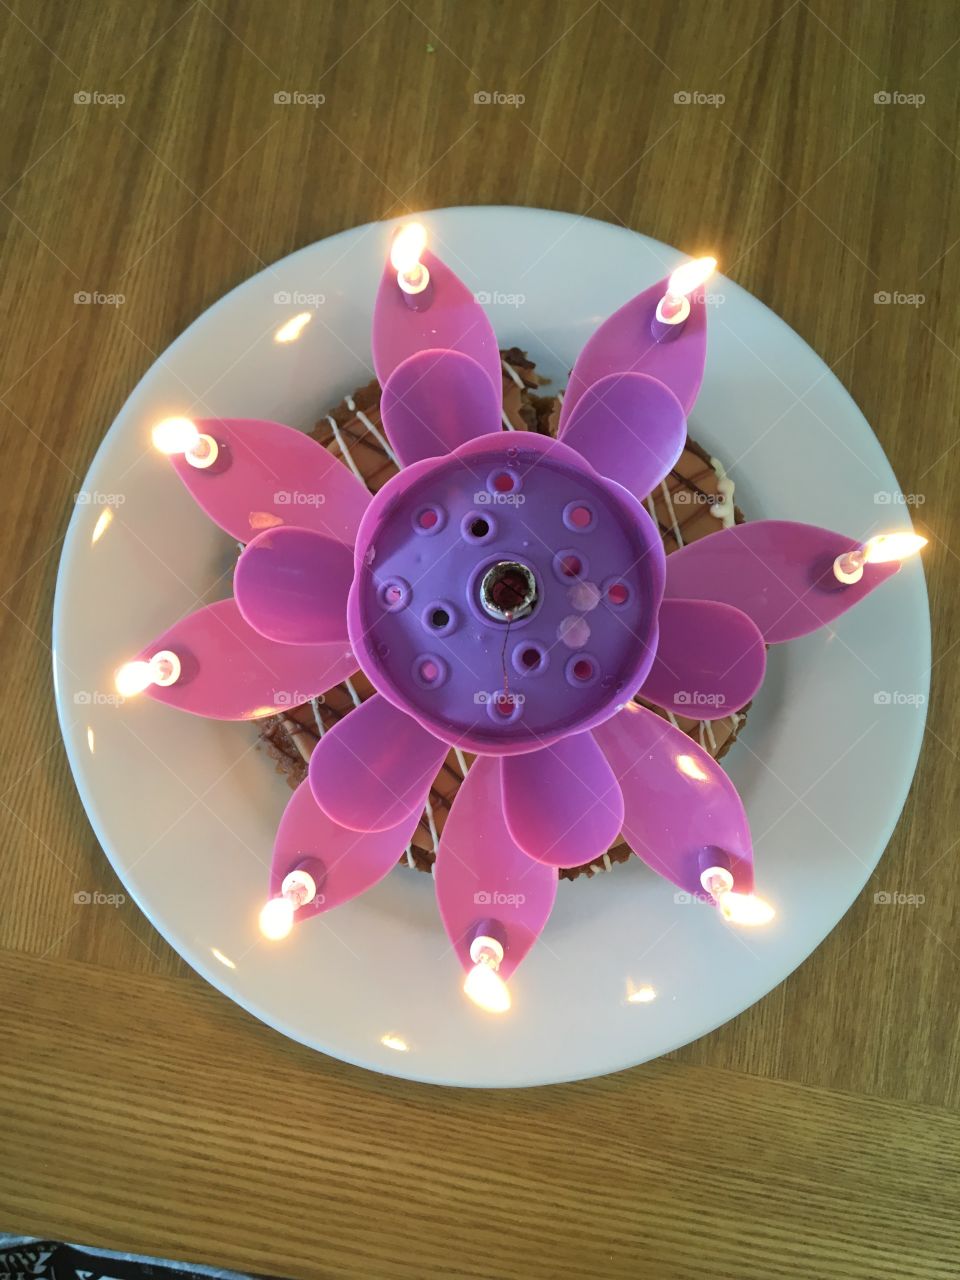 Flower candle open 